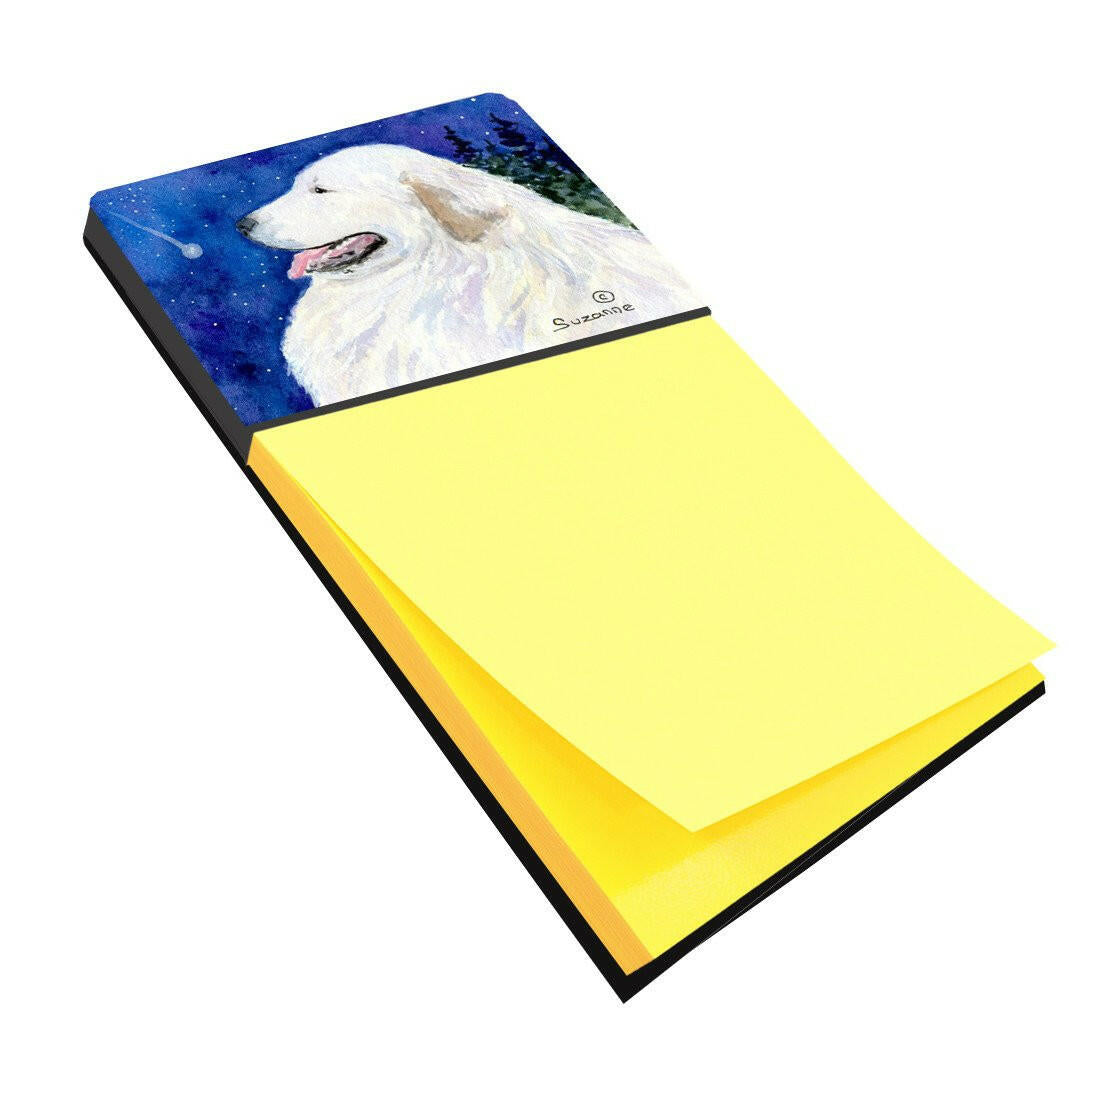 Great Pyrenees Refiillable Sticky Note Holder or Postit Note Dispenser SS8774SN by Caroline's Treasures